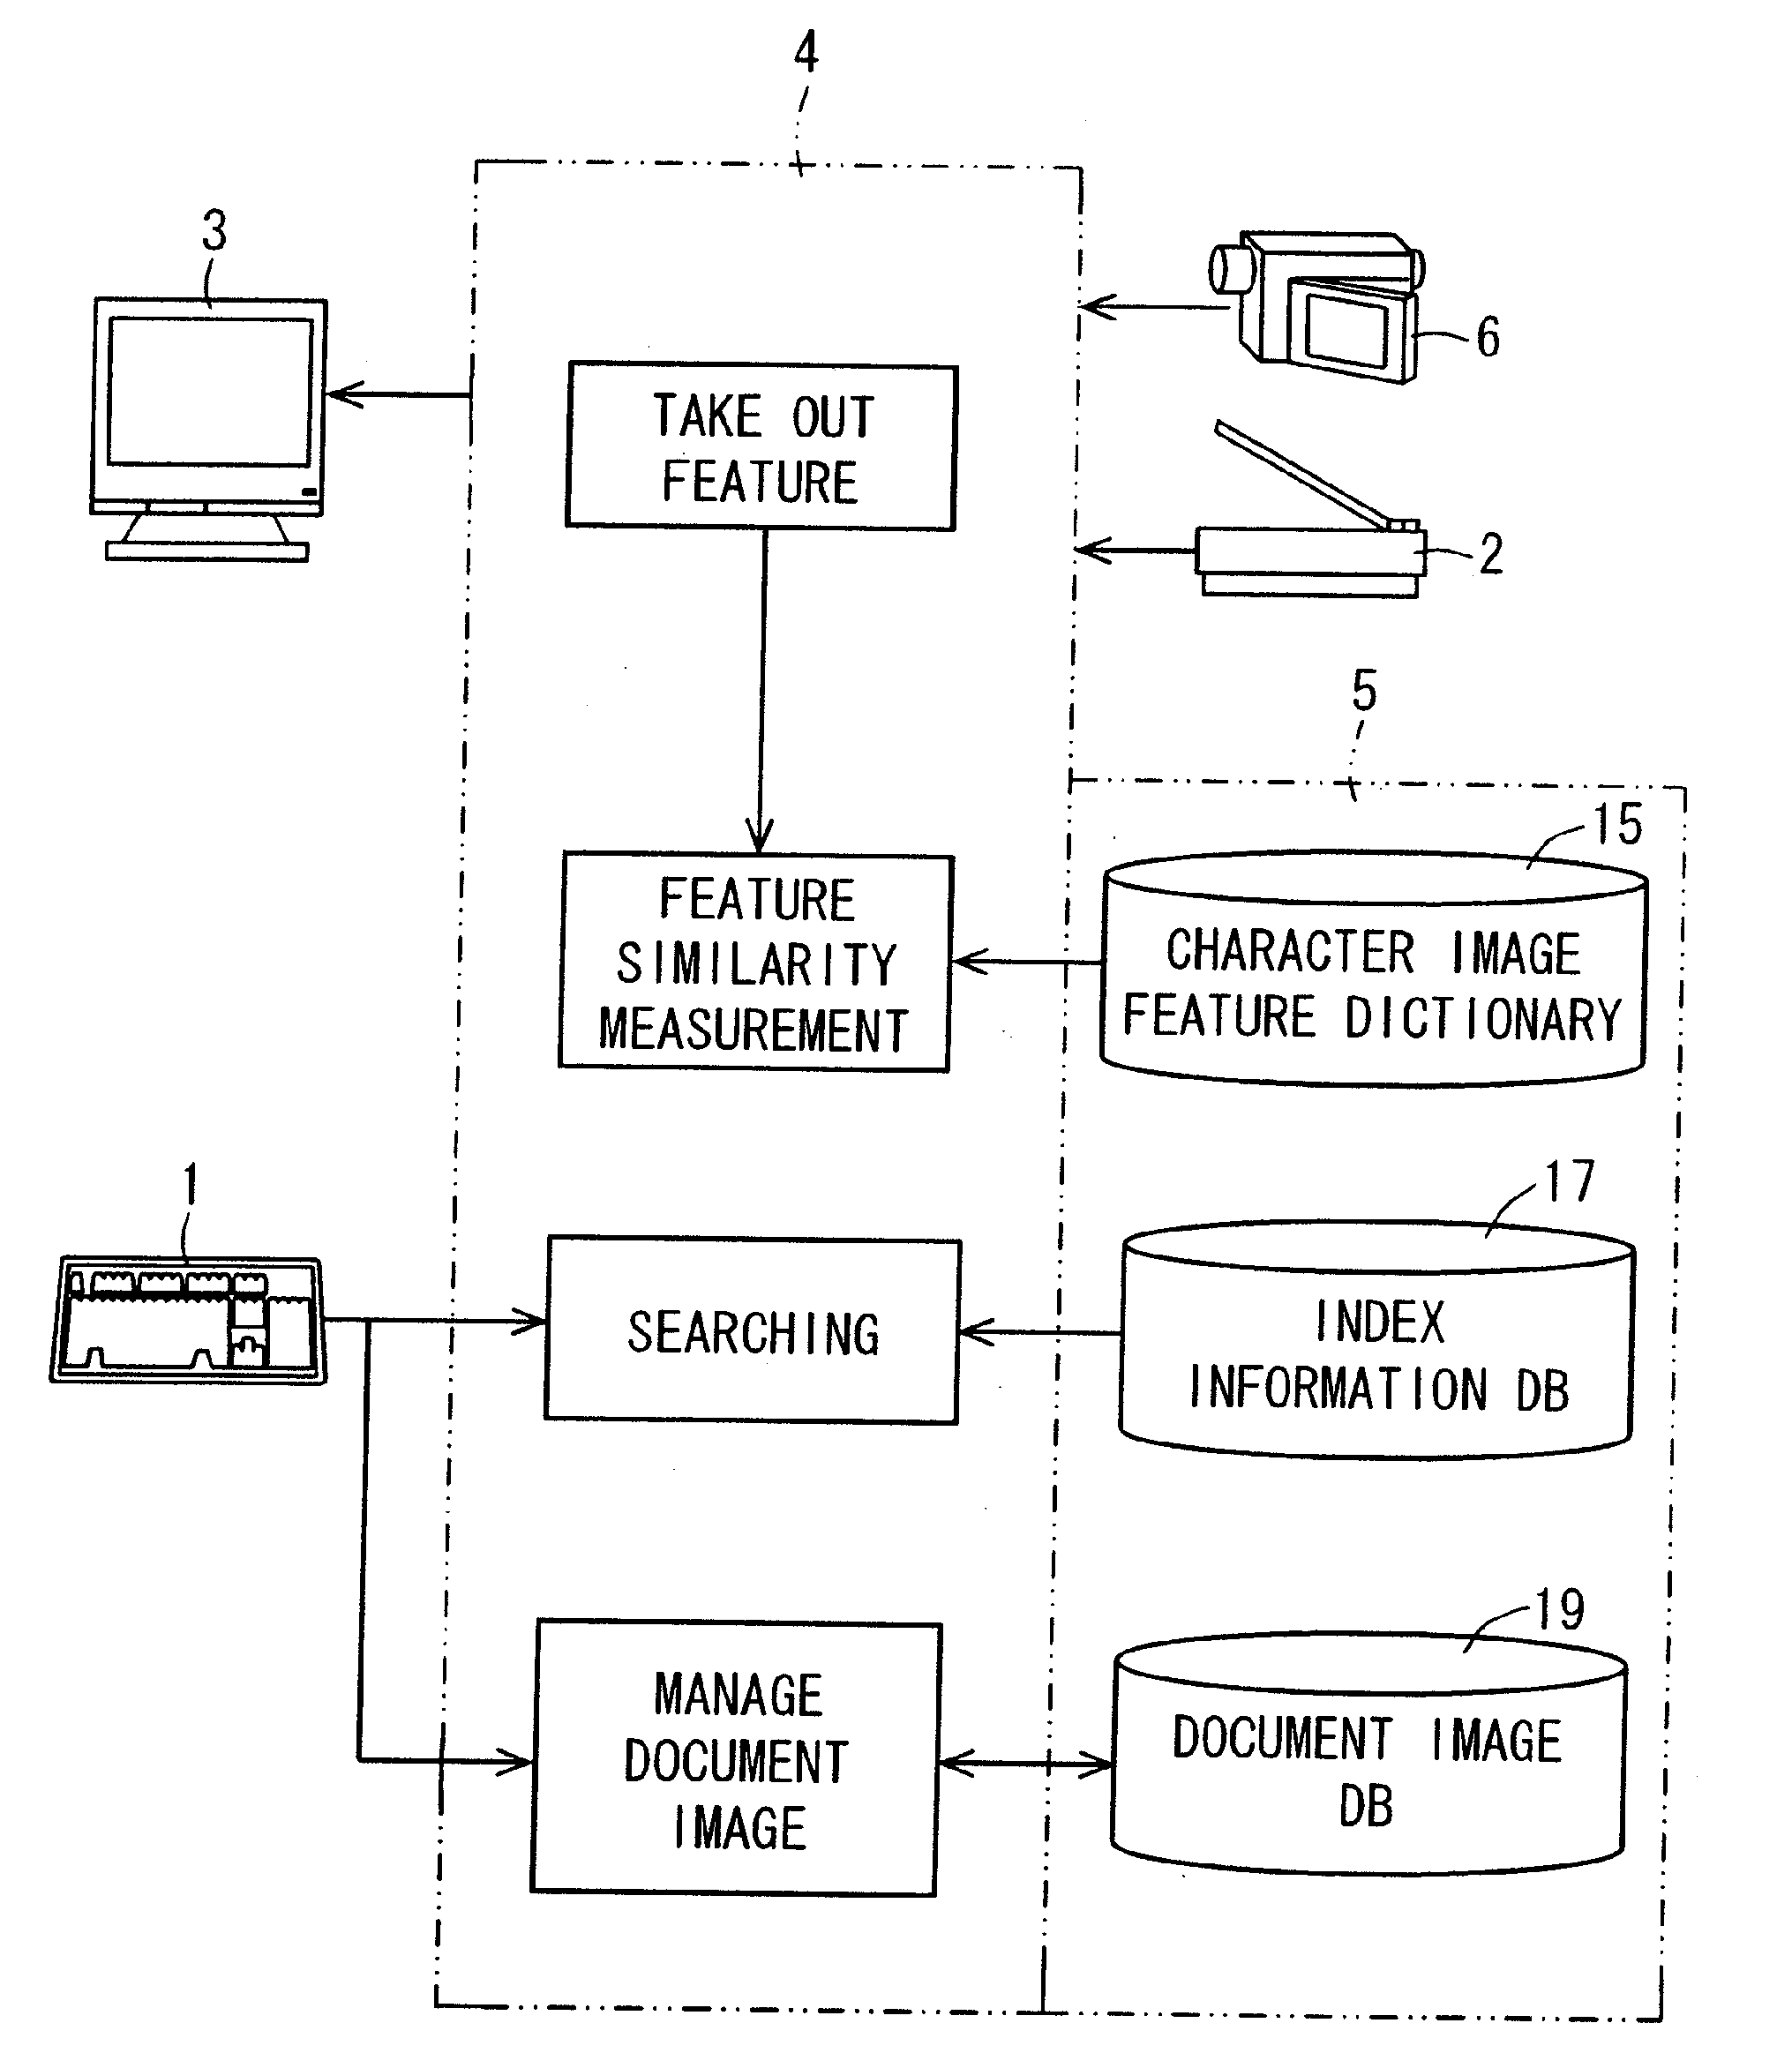 Document image processing apparatus, document image processing method, document image processing program, and recording medium on which document image processing program is recorded